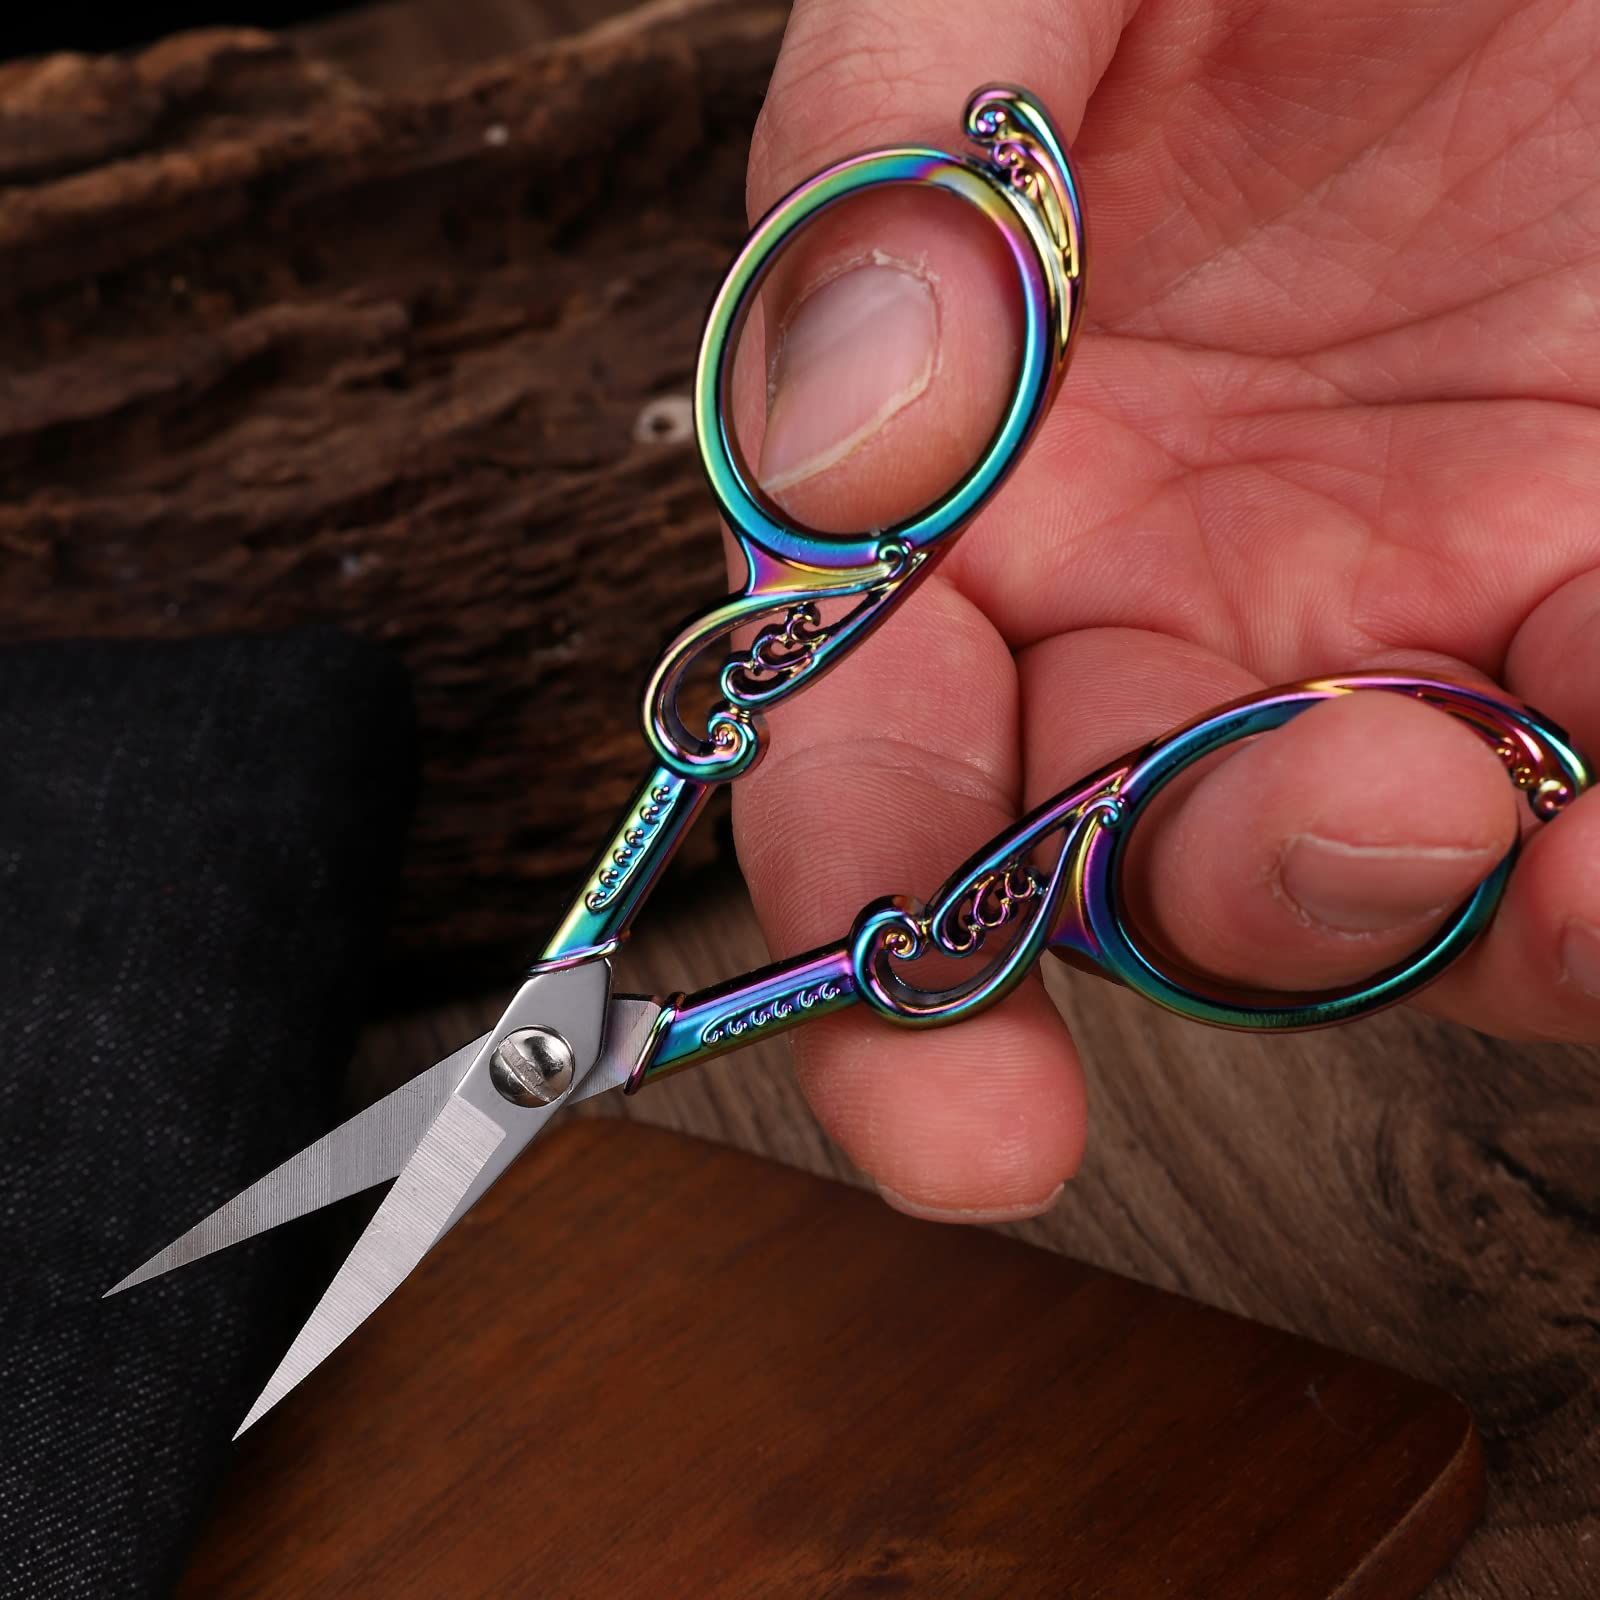 YOUGUOM Detail Embroidery Scissors – Small Sharp Pointed Tip Shears for Sewing, Craft, Artwork, Needlework Yarn, Thread Snips, Handicraft DIY Tool, 4.5in Rainbow Vintage Style